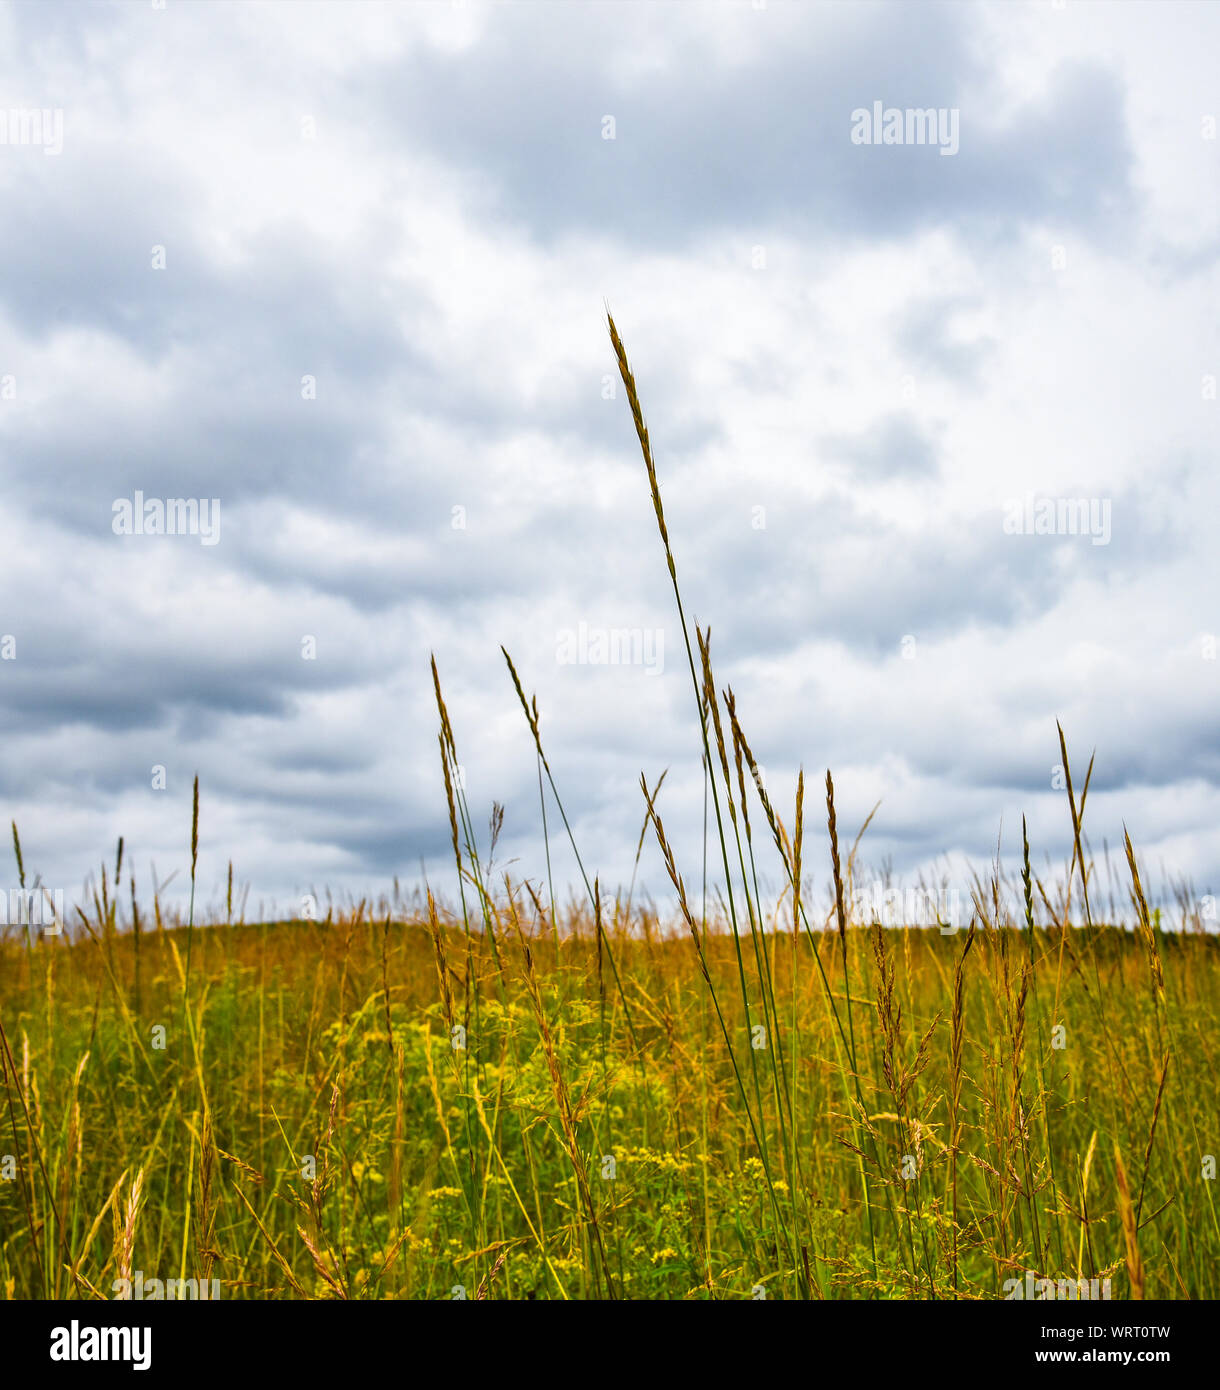 Wild plants in the field Stock Photo